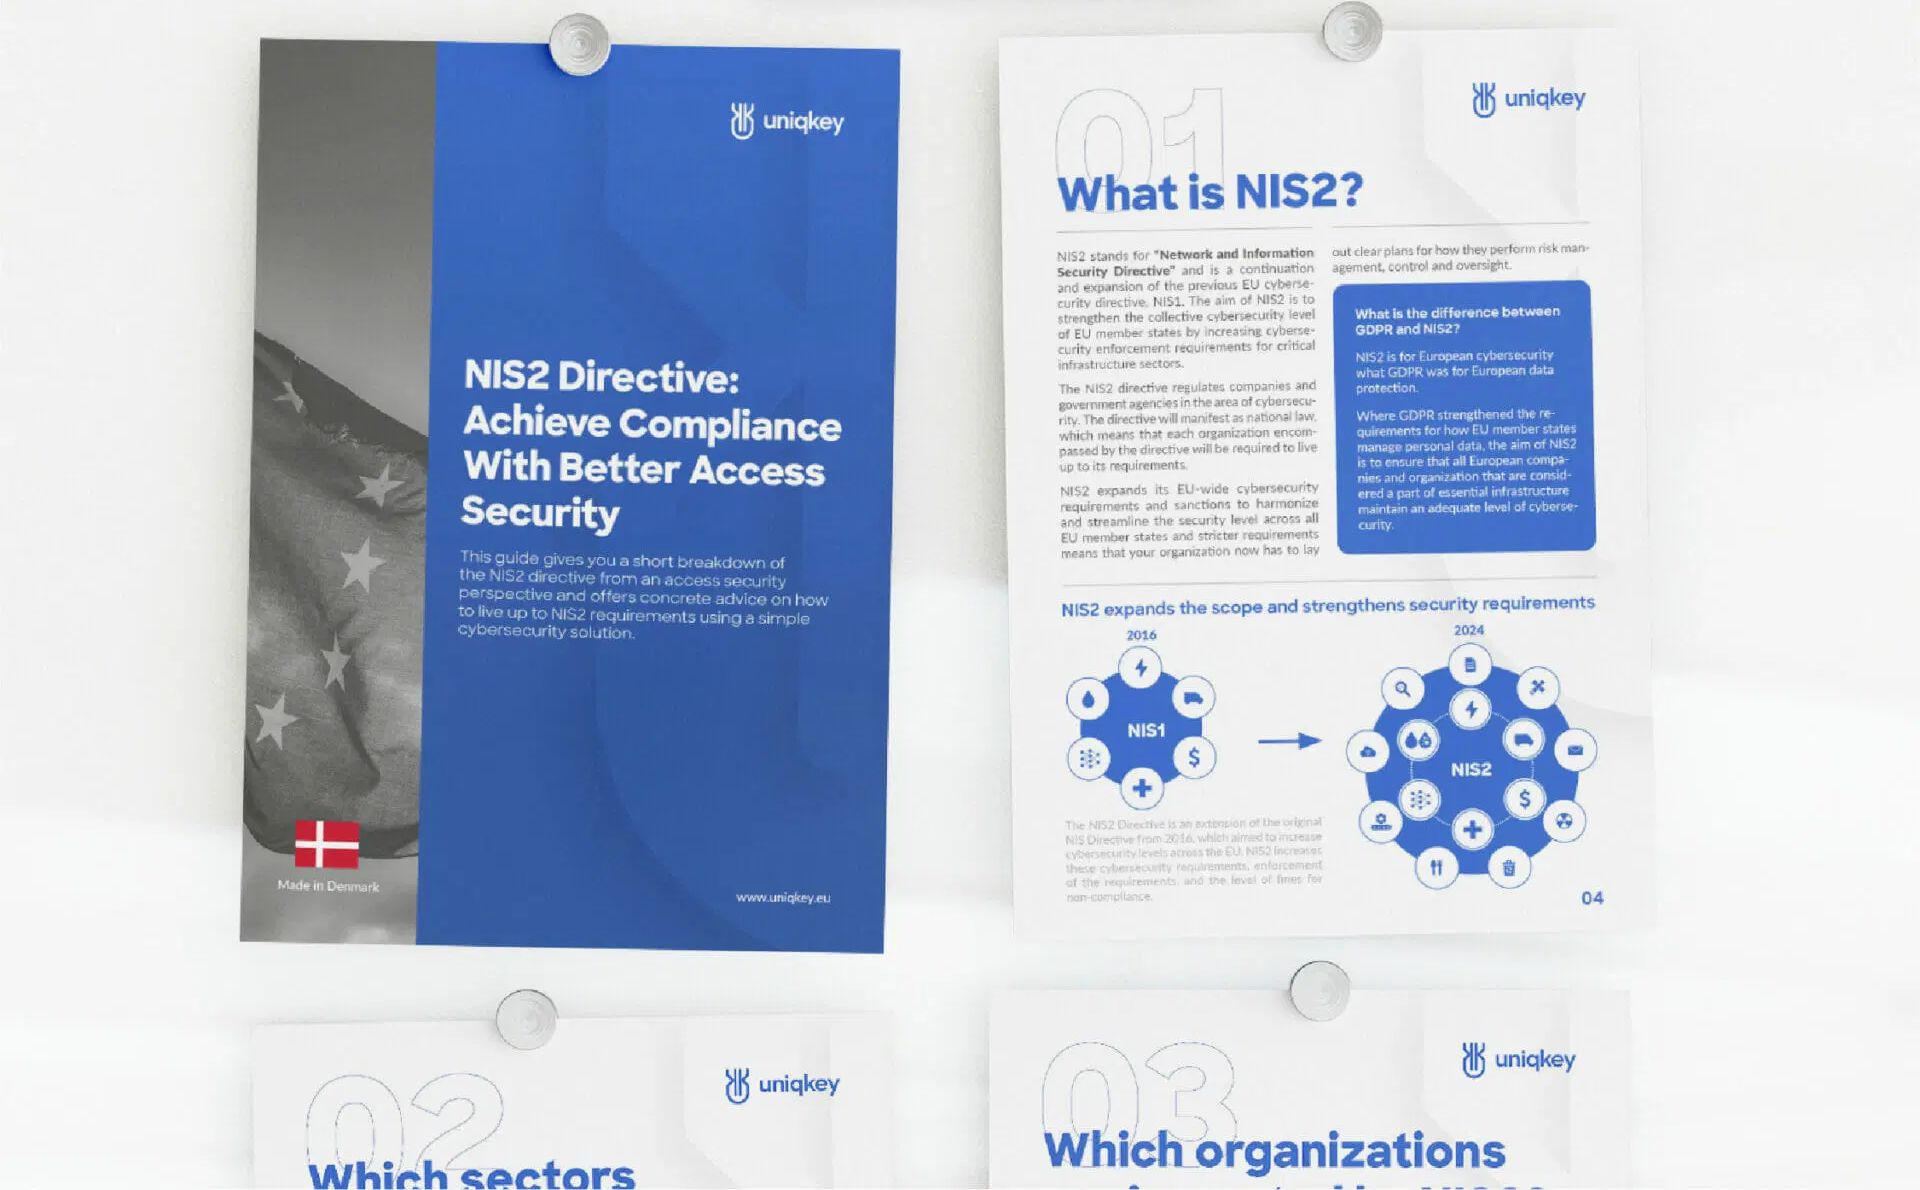 Discover the NIS2 Directive: A game-changer in EU cybersecurity. With strict rules and penalties, EU companies must comply by Oct 17, 2024.